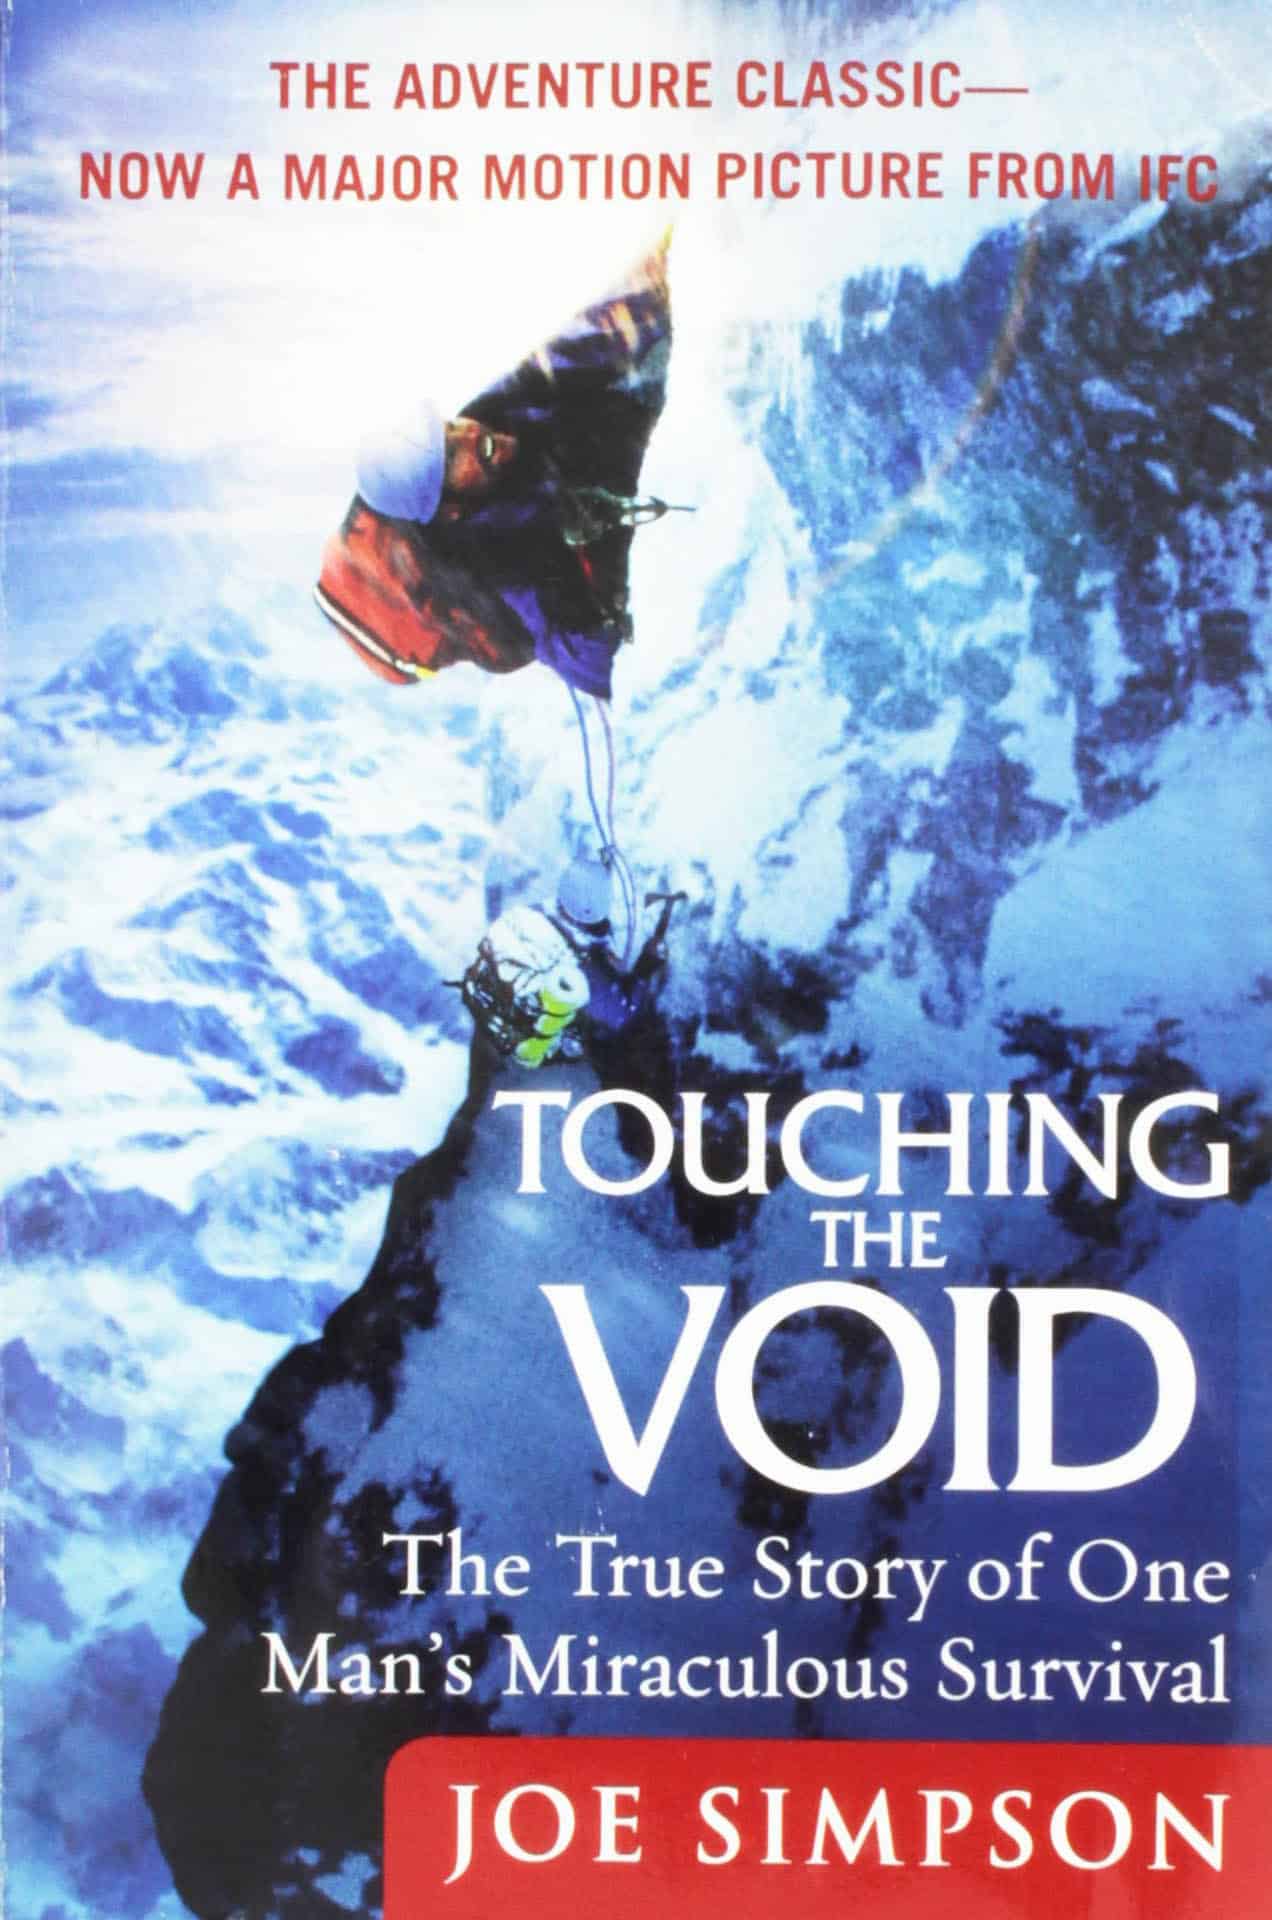 Touching the Void by Joe Simpson 